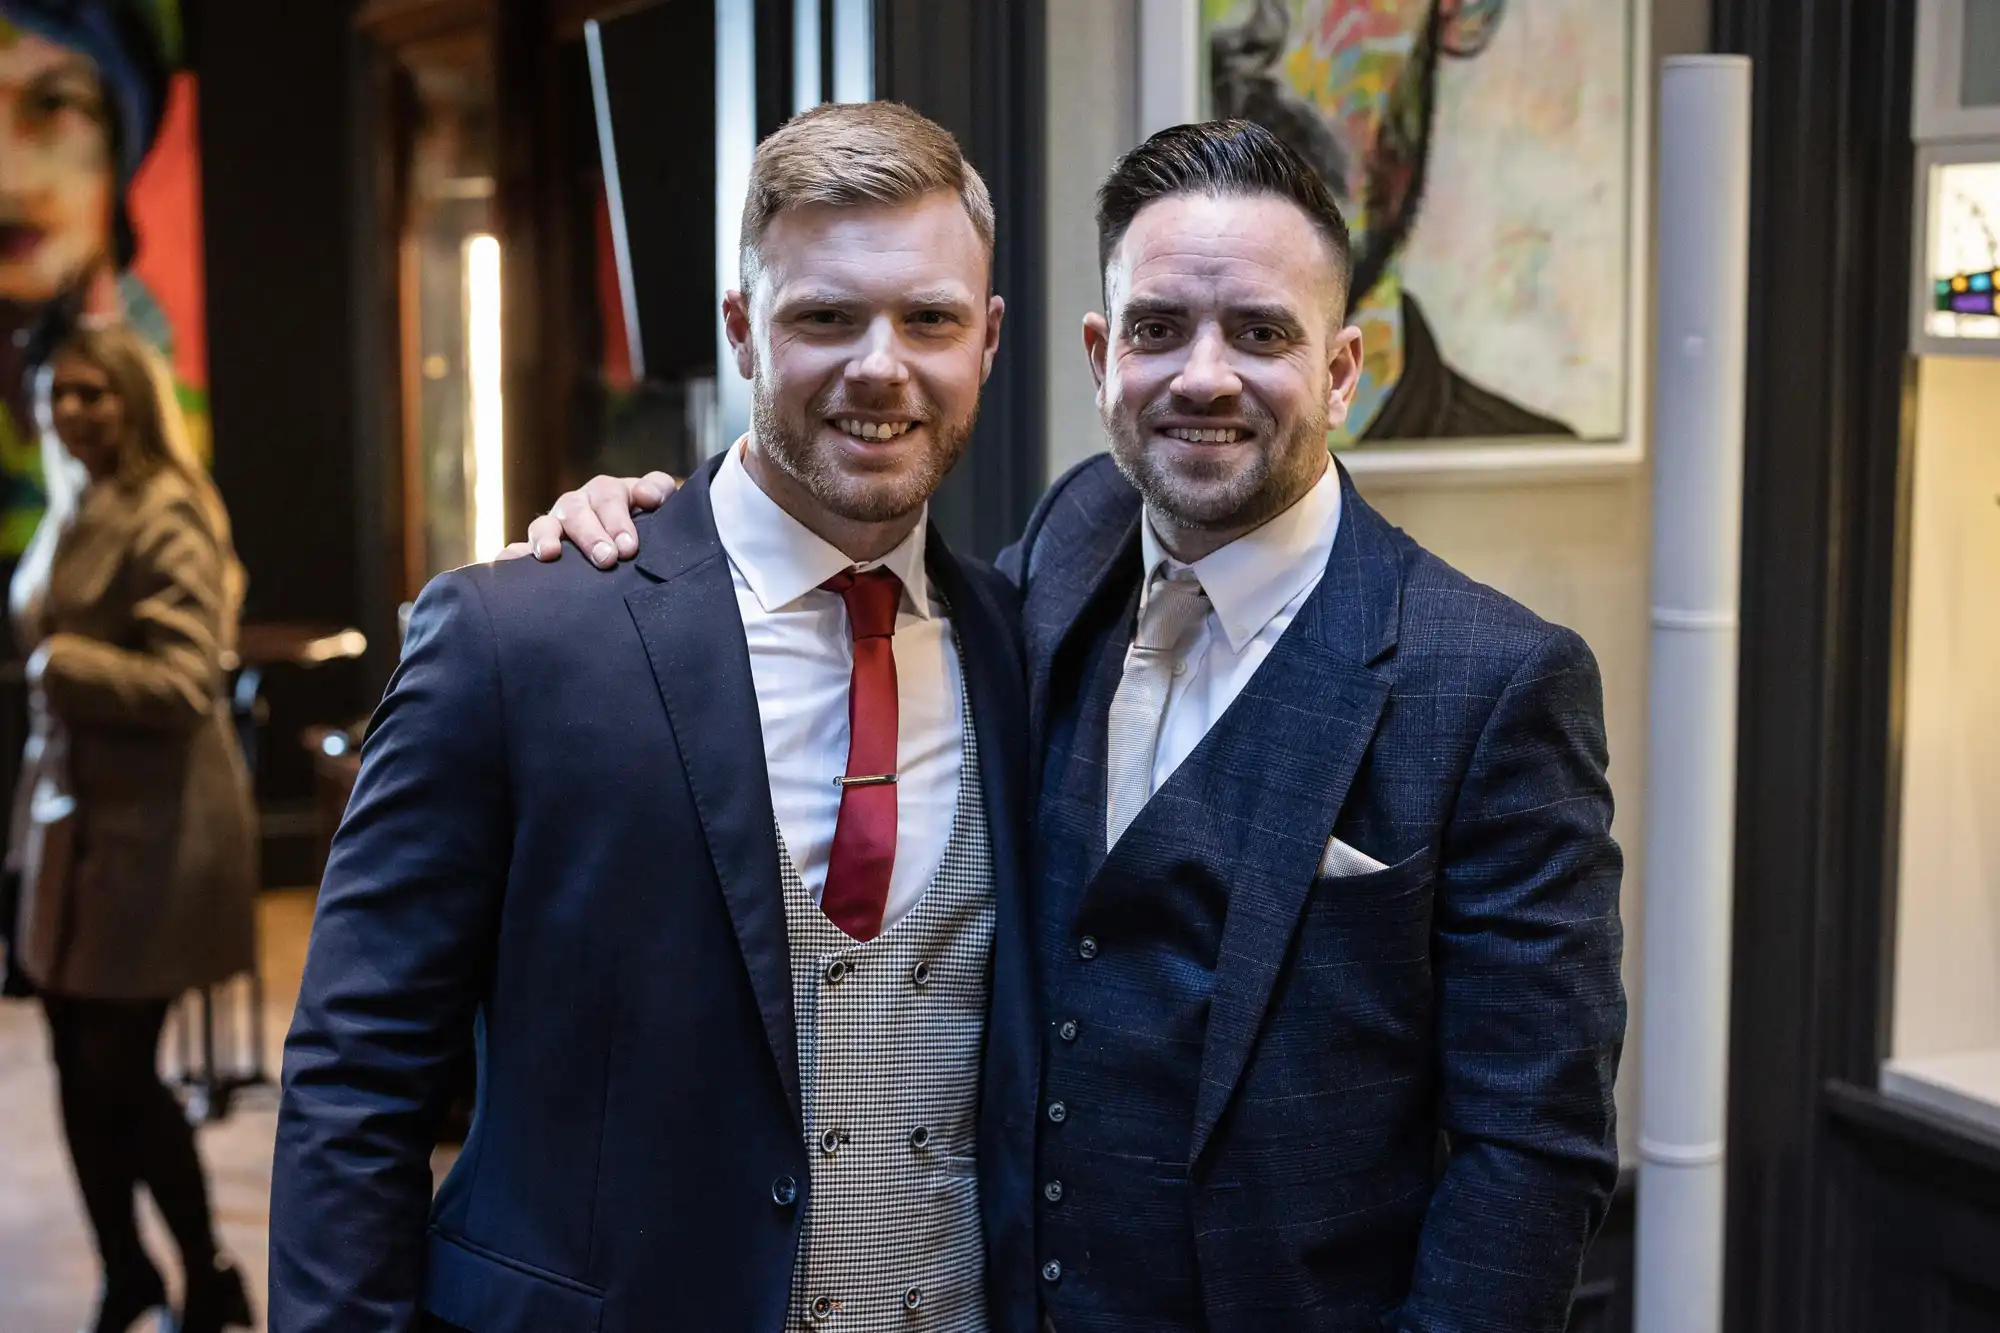 Two men dressed in suits are smiling and posing together indoors. One has a red tie, and the other has a blue tie. A person is blurred in the background.